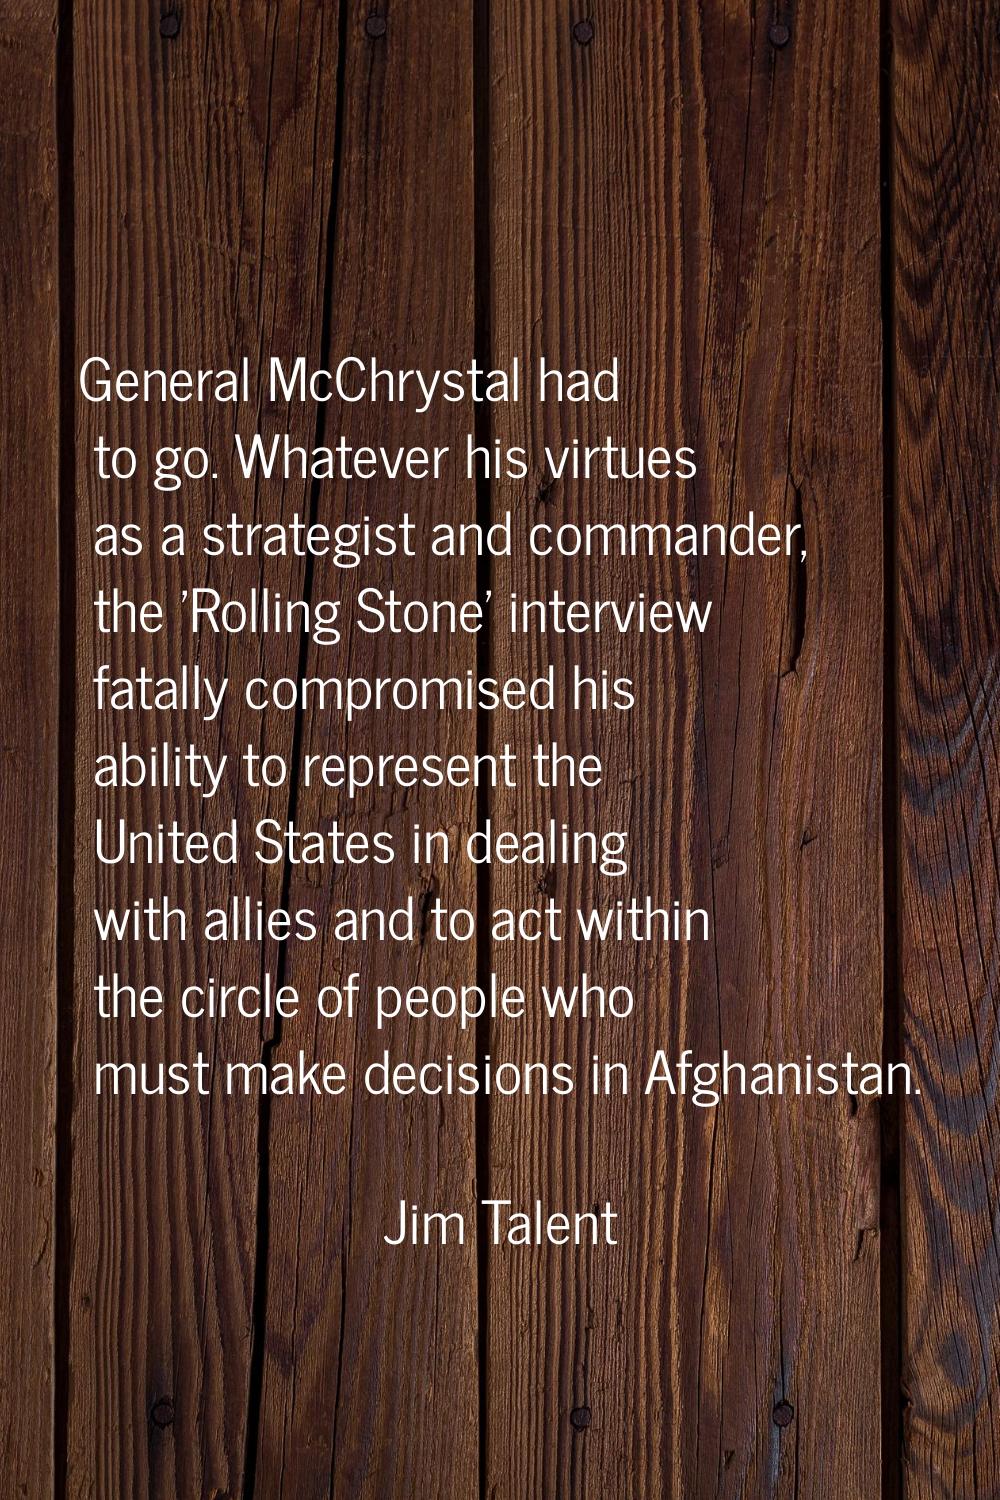 General McChrystal had to go. Whatever his virtues as a strategist and commander, the 'Rolling Ston